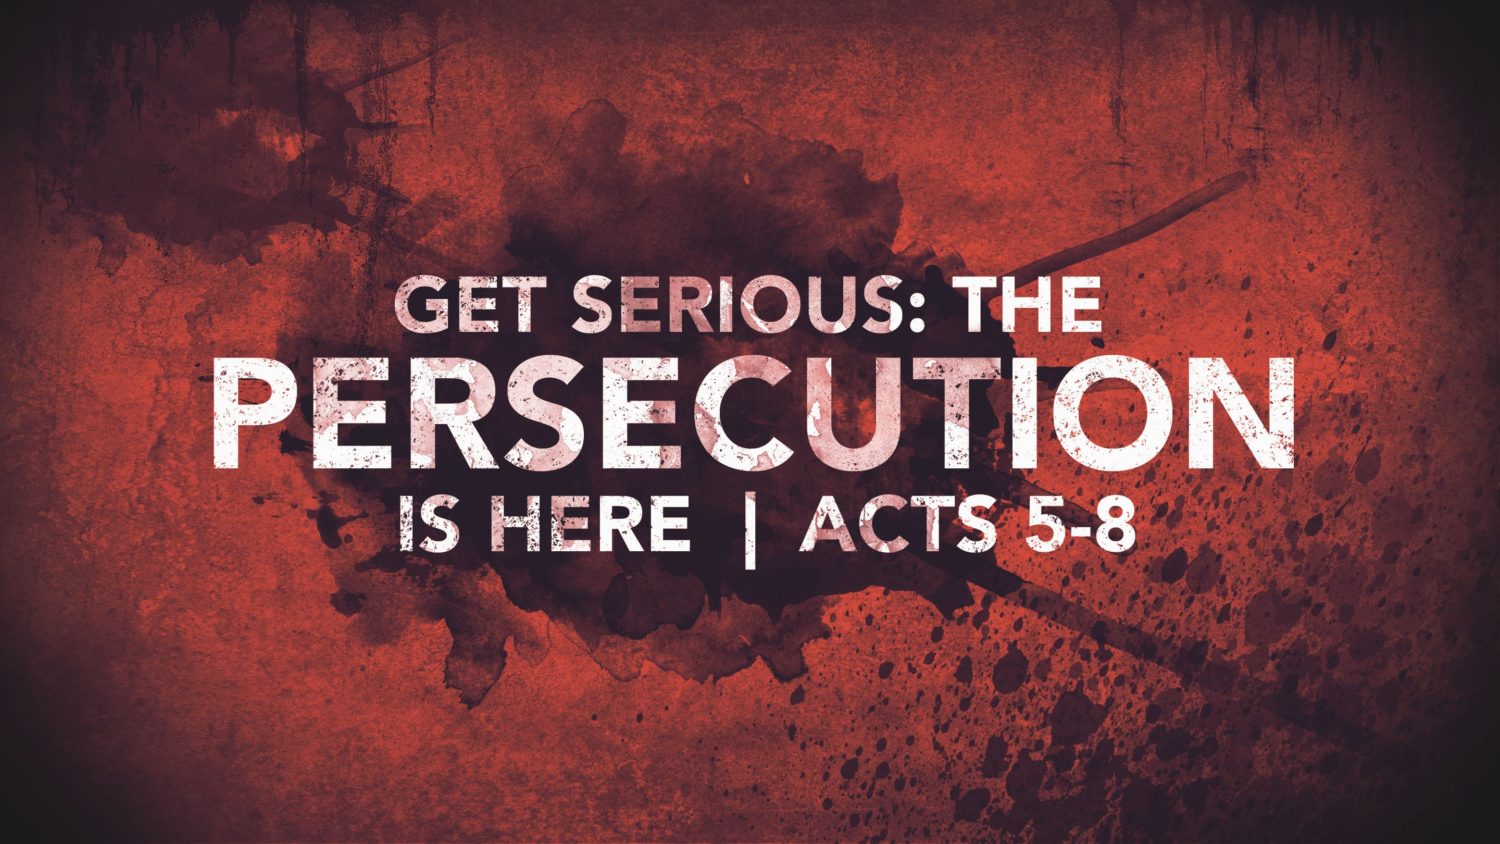 Featured image for “Get Serious: The Persecution Is Here”